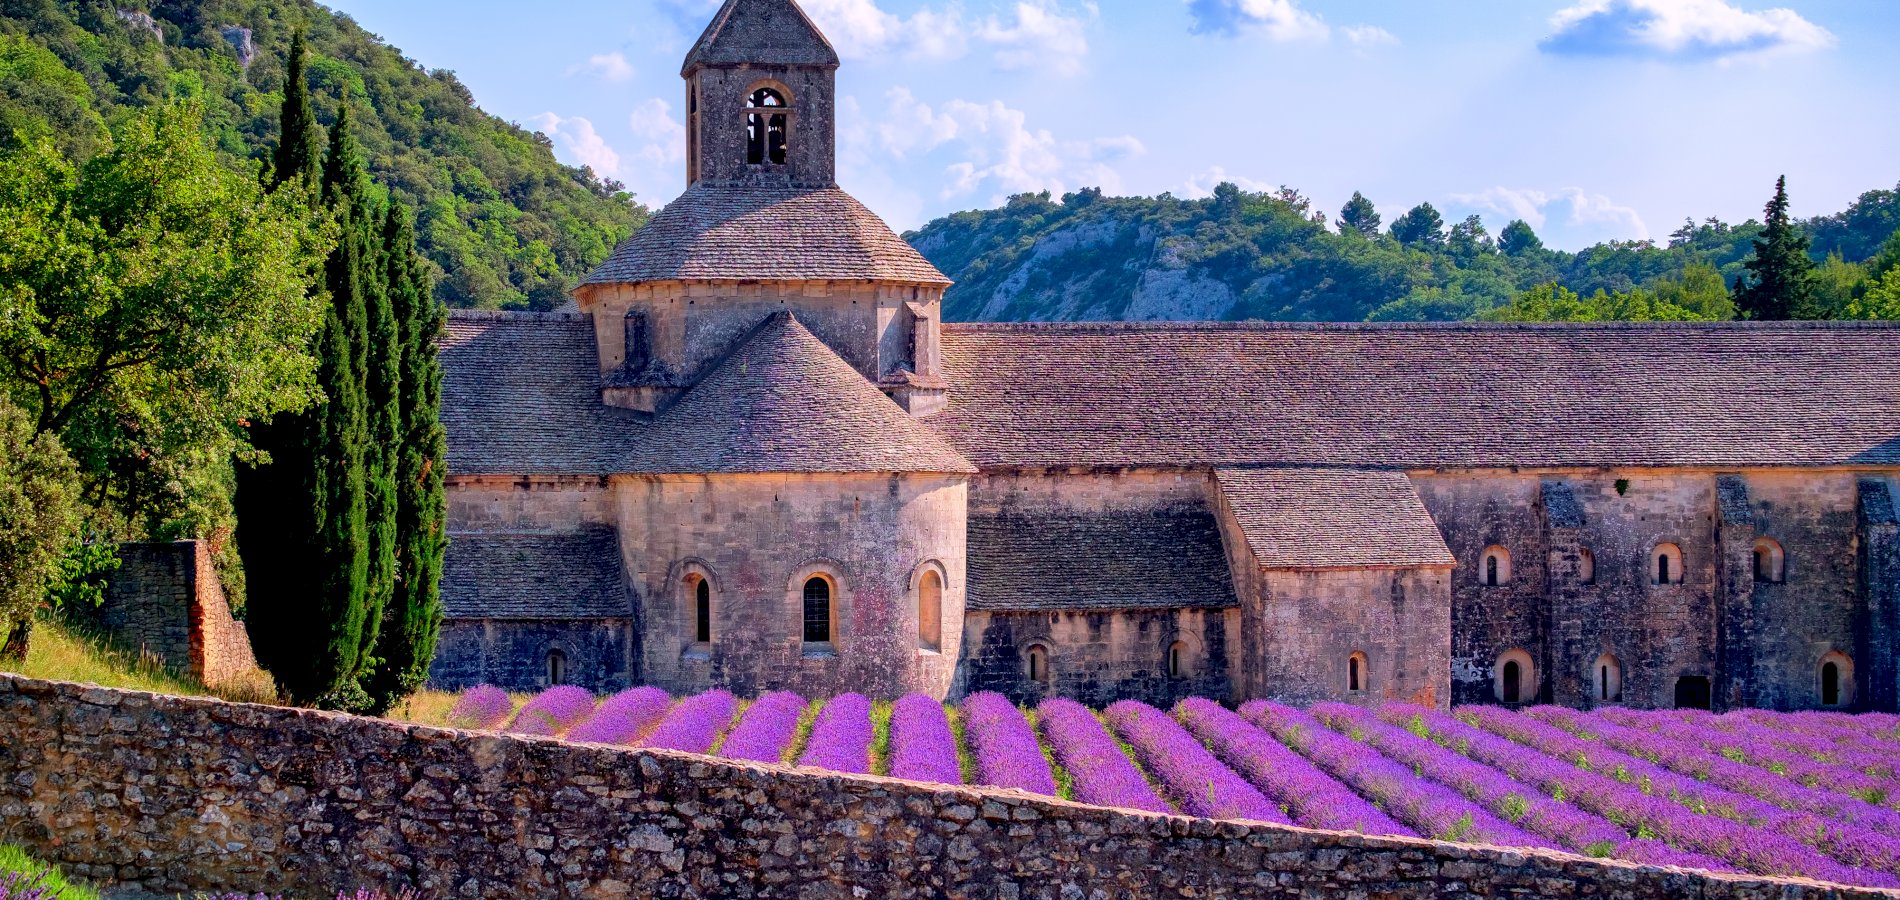 Ophorus Tours - 5 Days Provence Private Travel Package - 3* Hotel Option